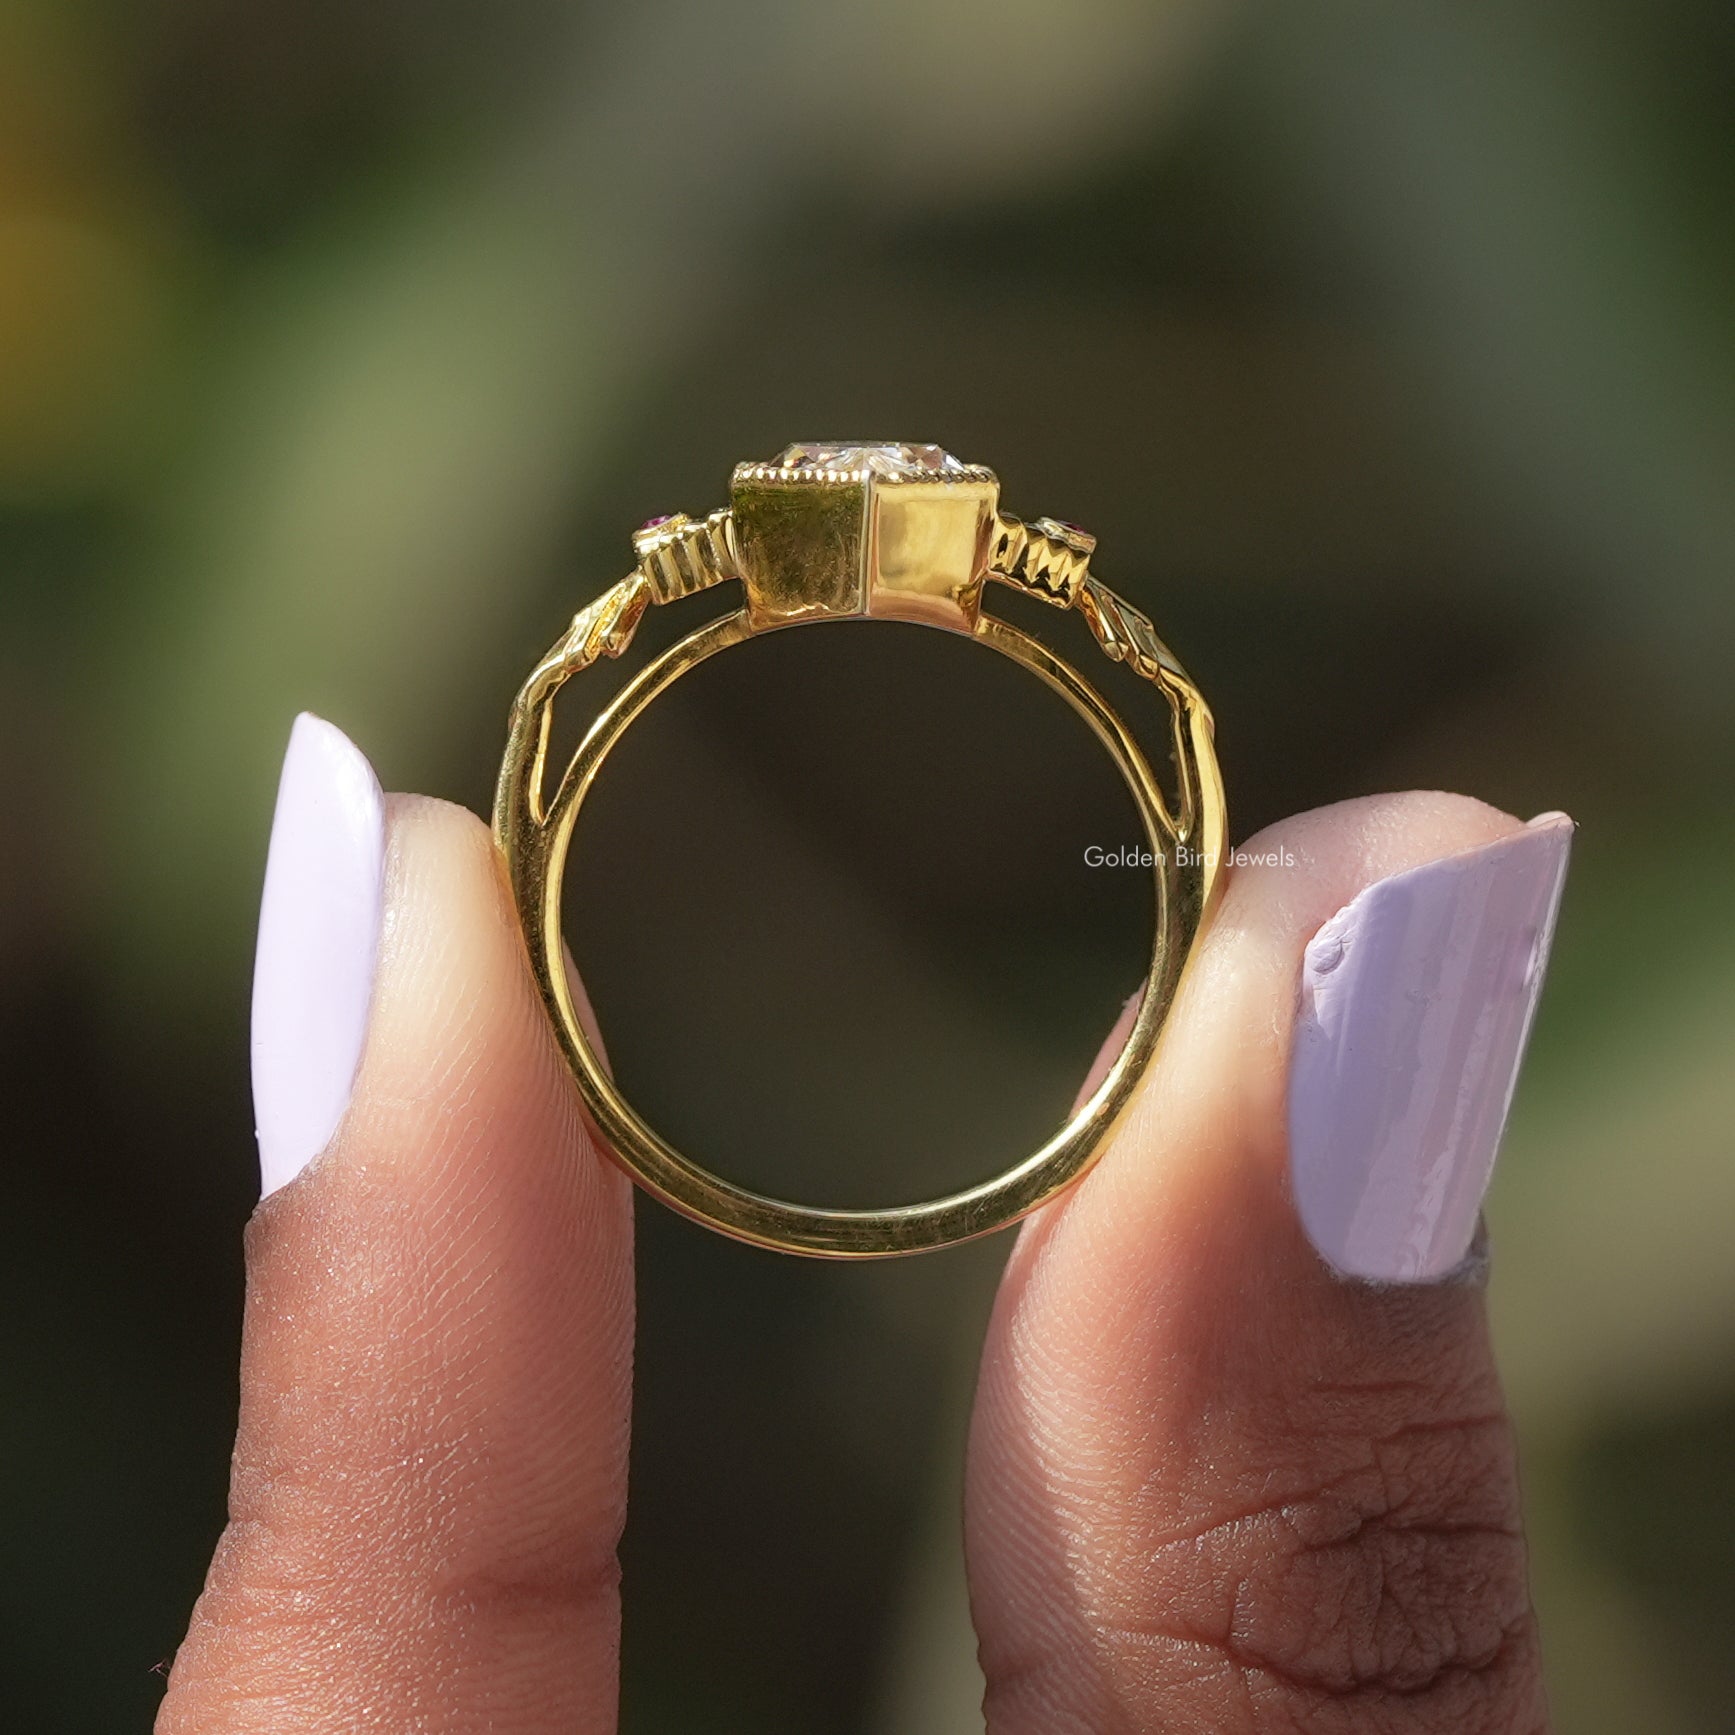 [In two finger front view of moissanite marquise cut ring made of 14k yellow gold]-[Golden Bird Jewels]